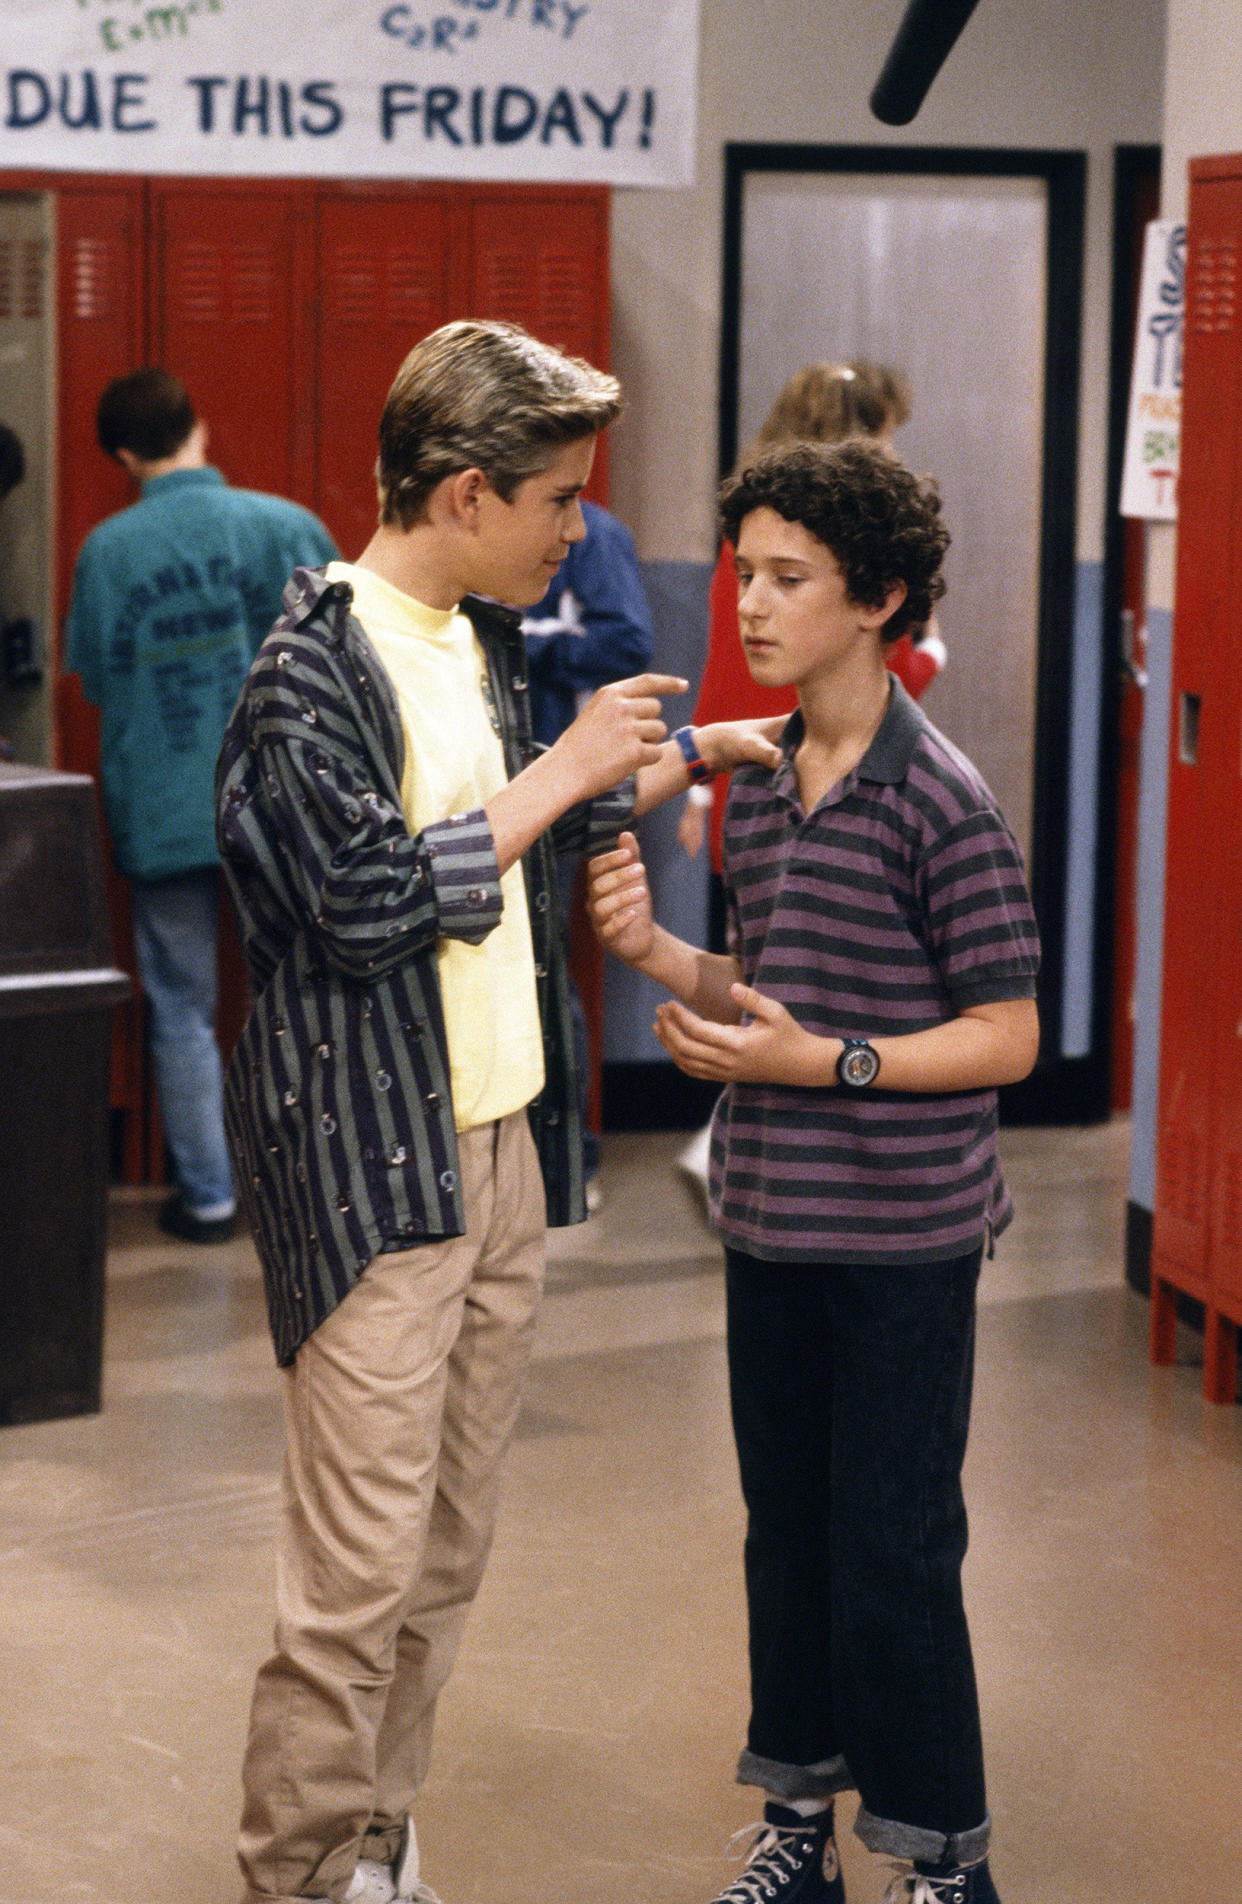 Image: Saved by the Bell (NBC)